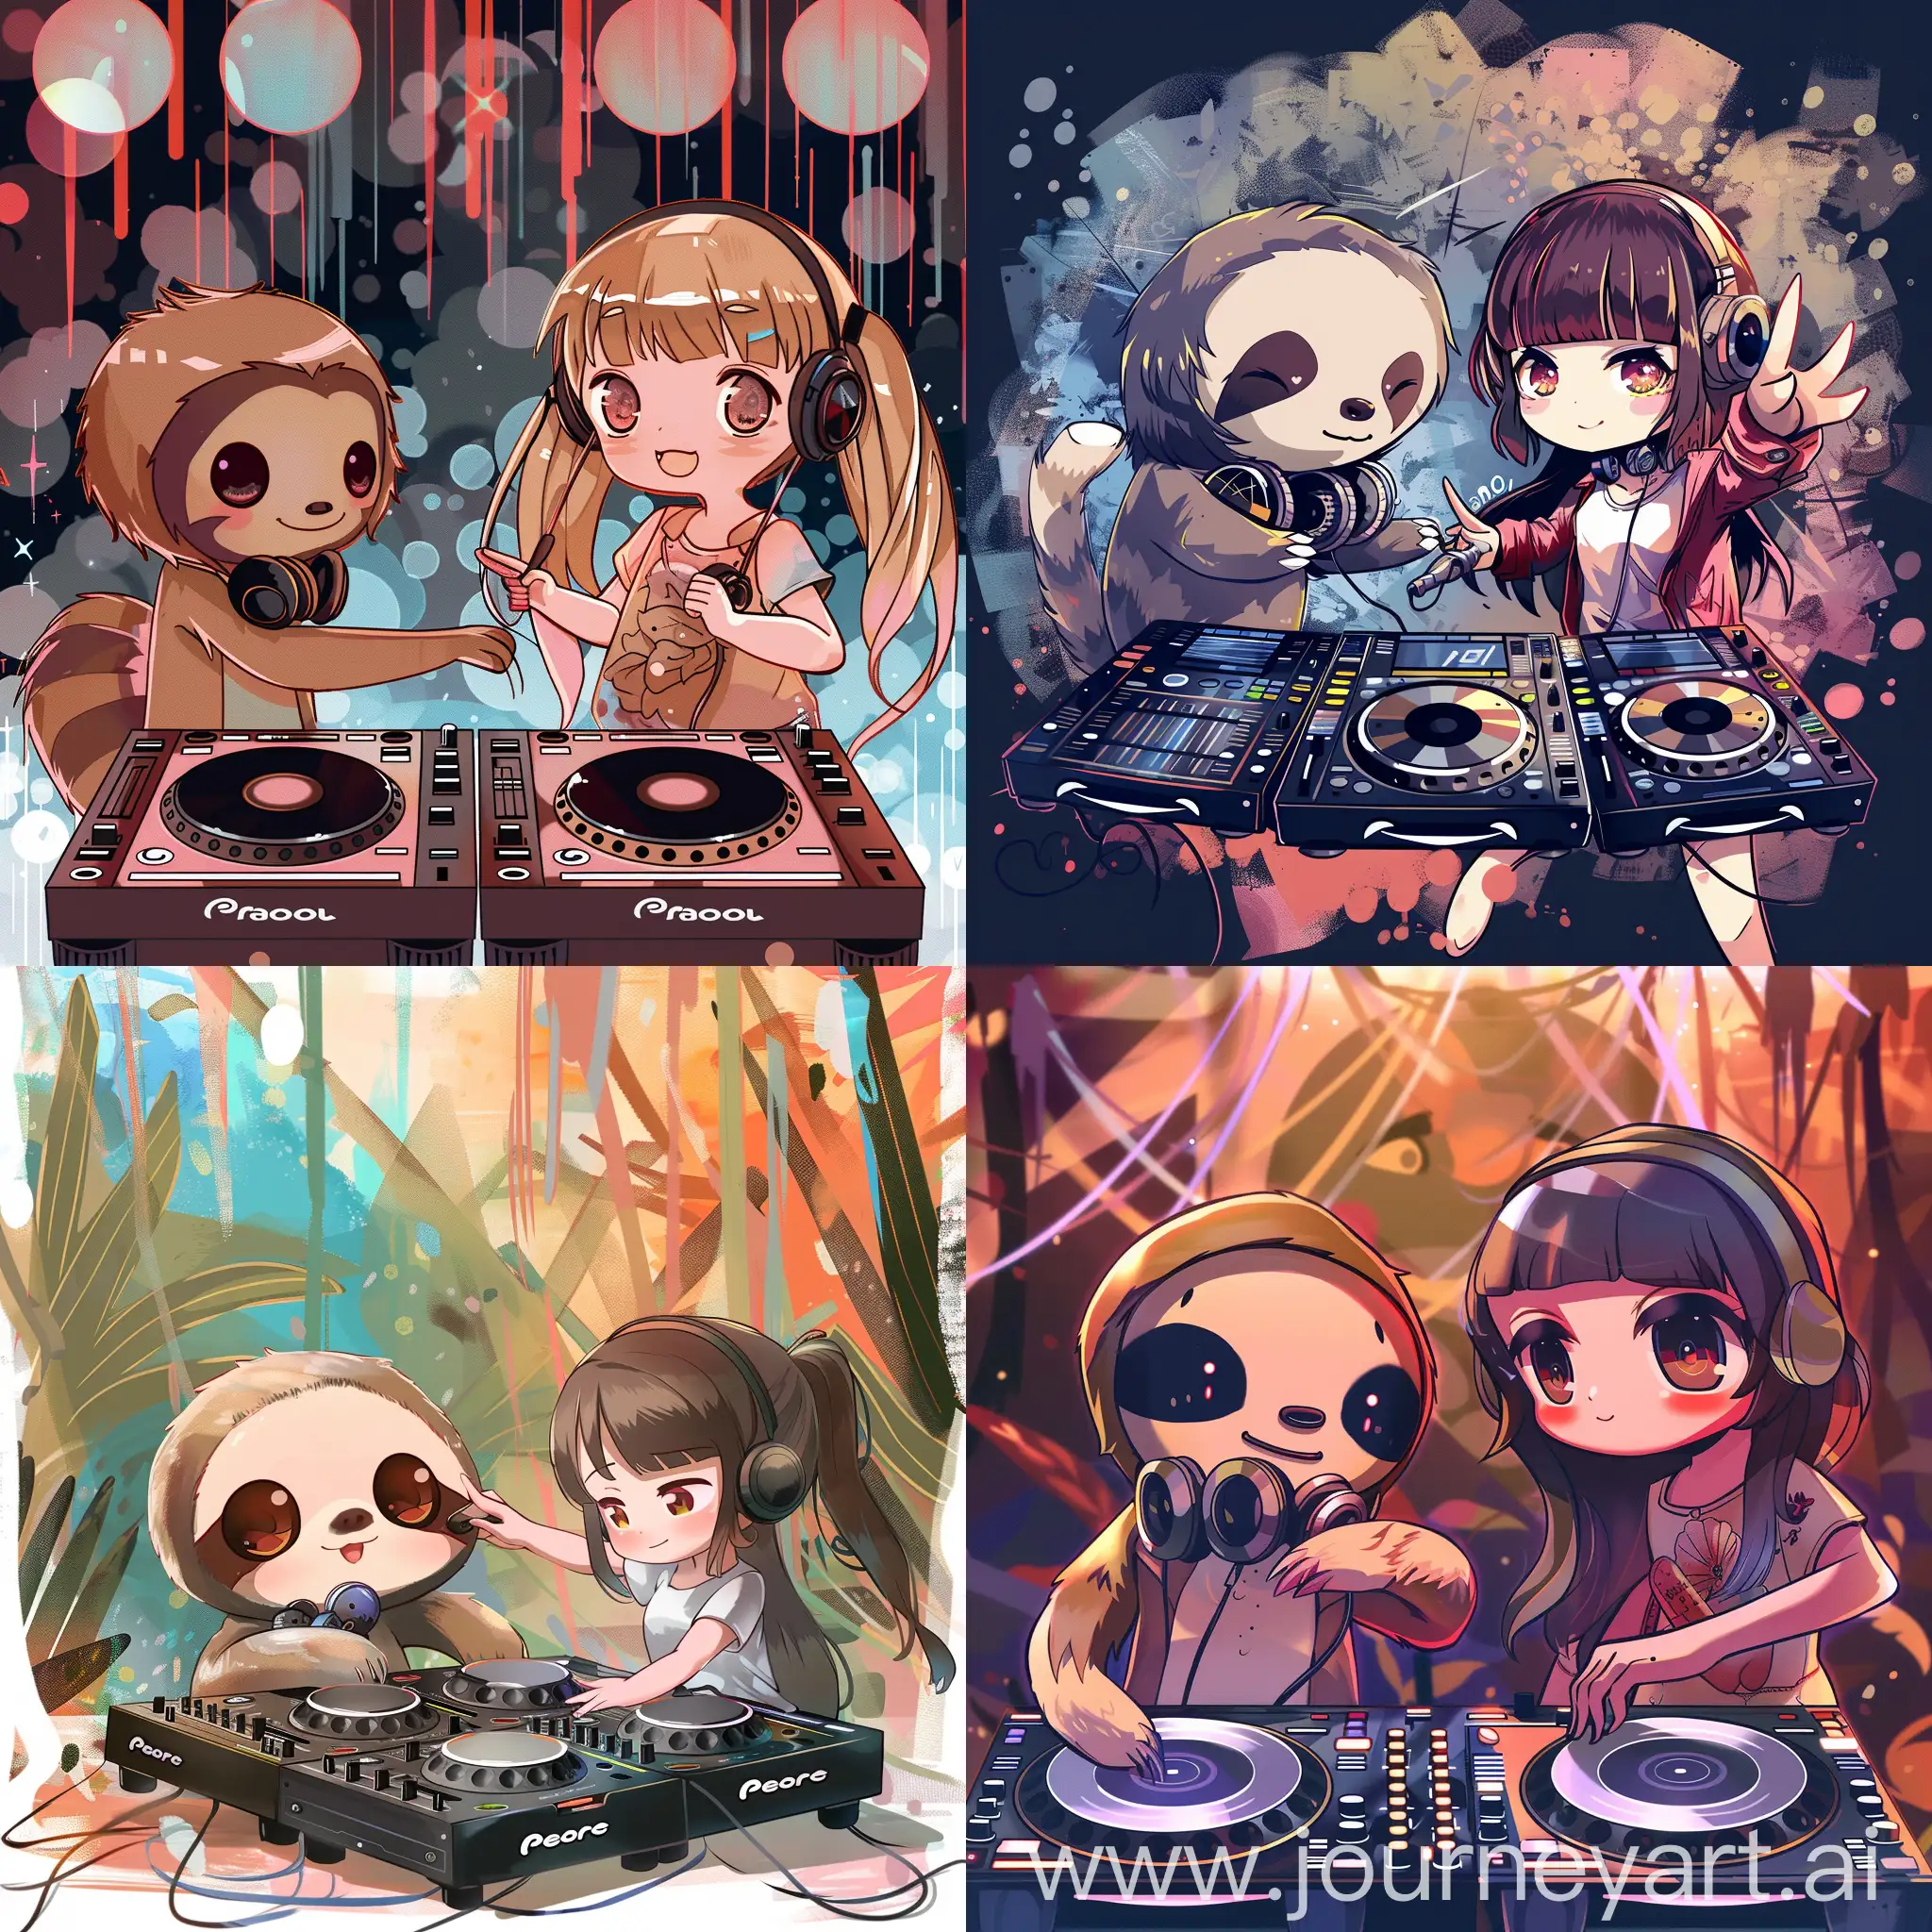 chibi sloth and anime girl playing dj, with abstract background, 